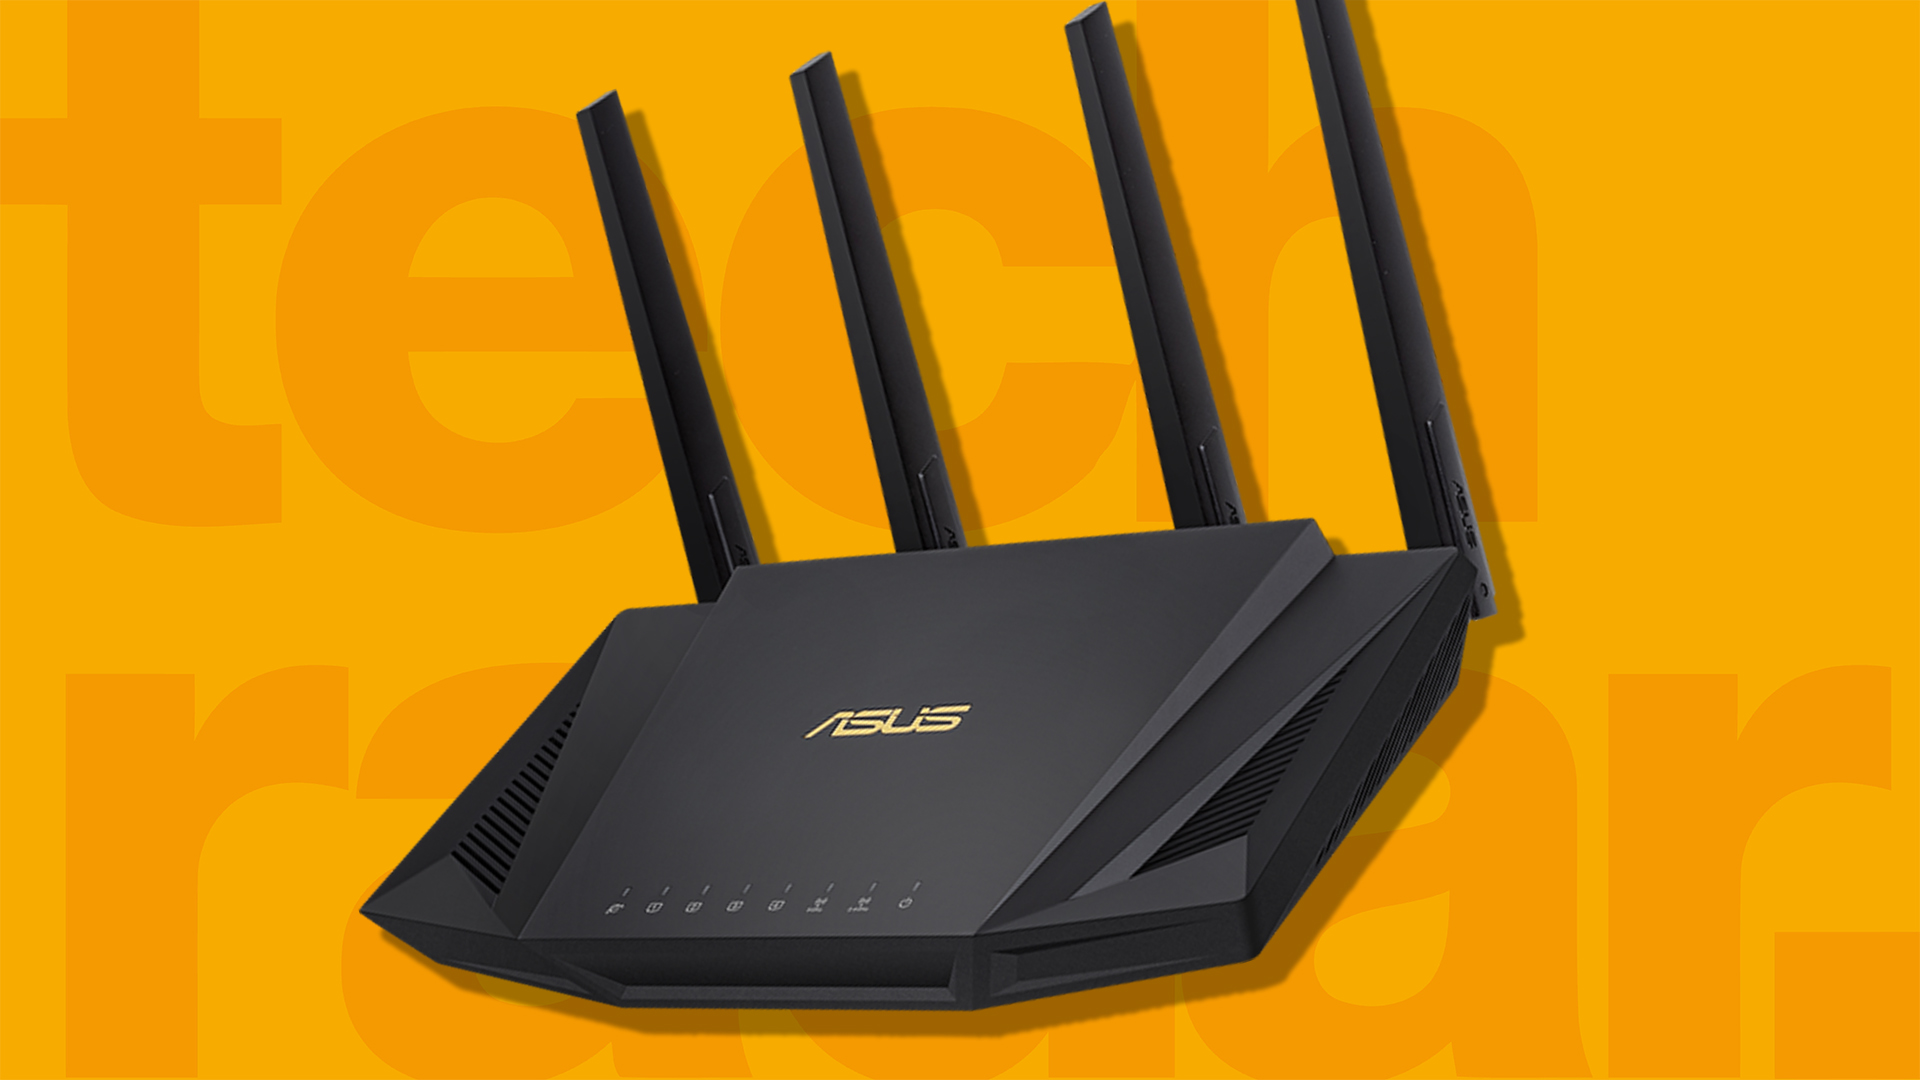 cap donor moth The best Asus router 2023: top gaming routers from Asus | TechRadar